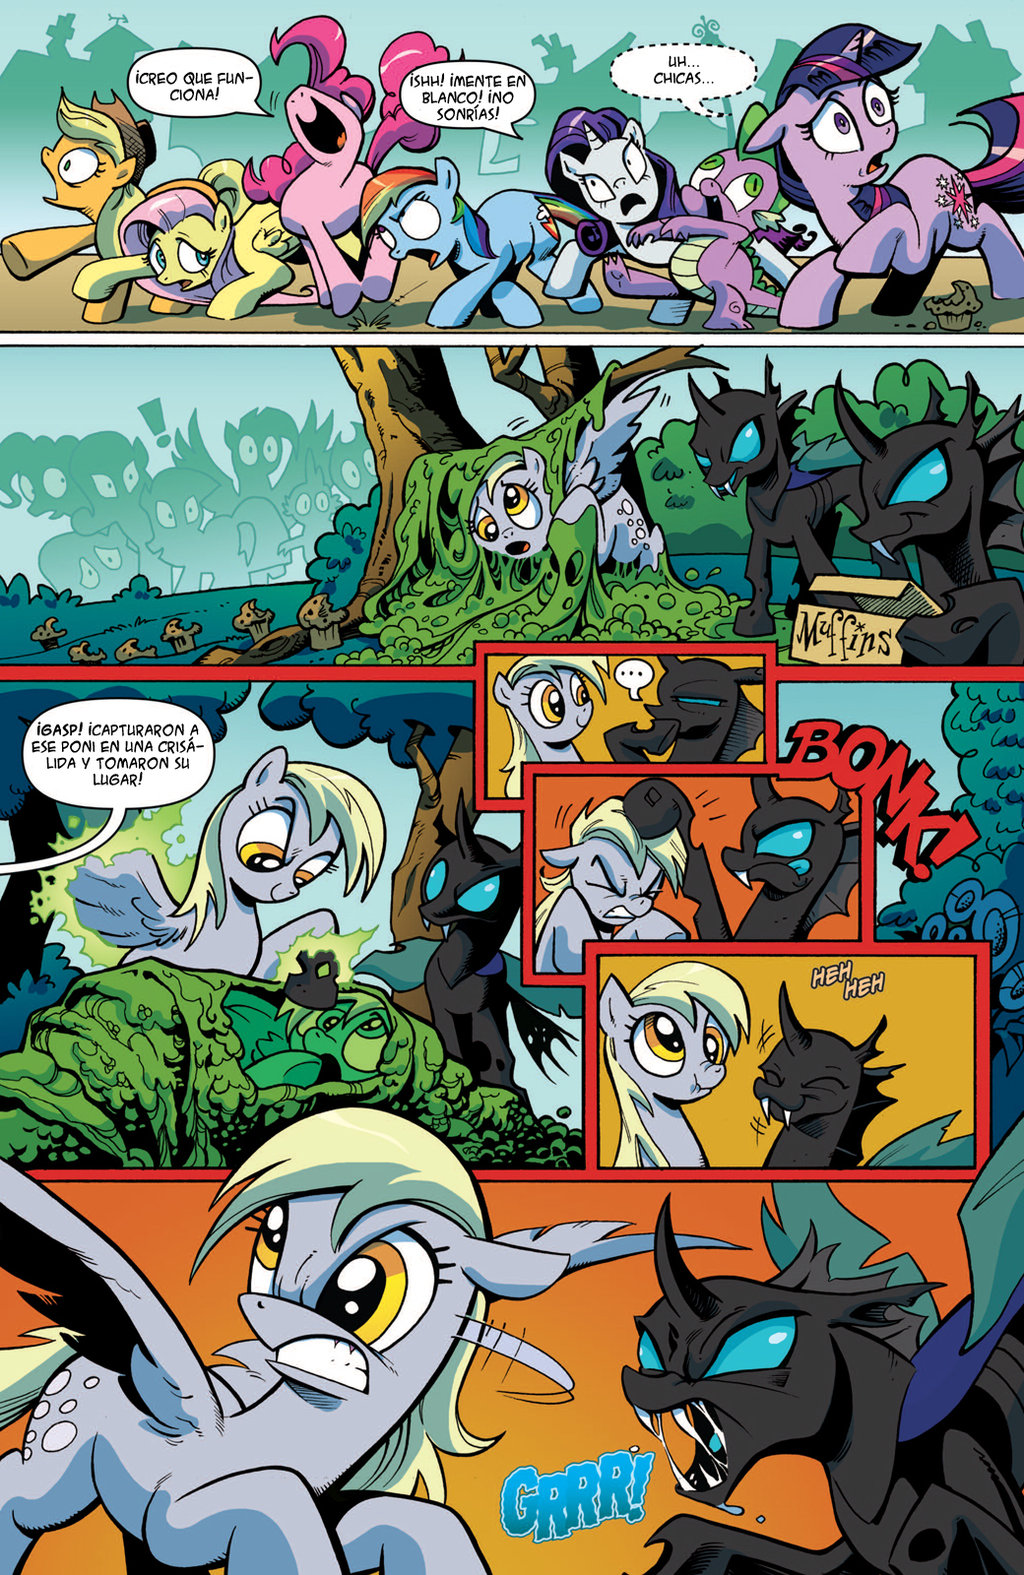 Comic 1 My Little Pony Spanish (Parte 10/22) by cejs94 on Clipart library